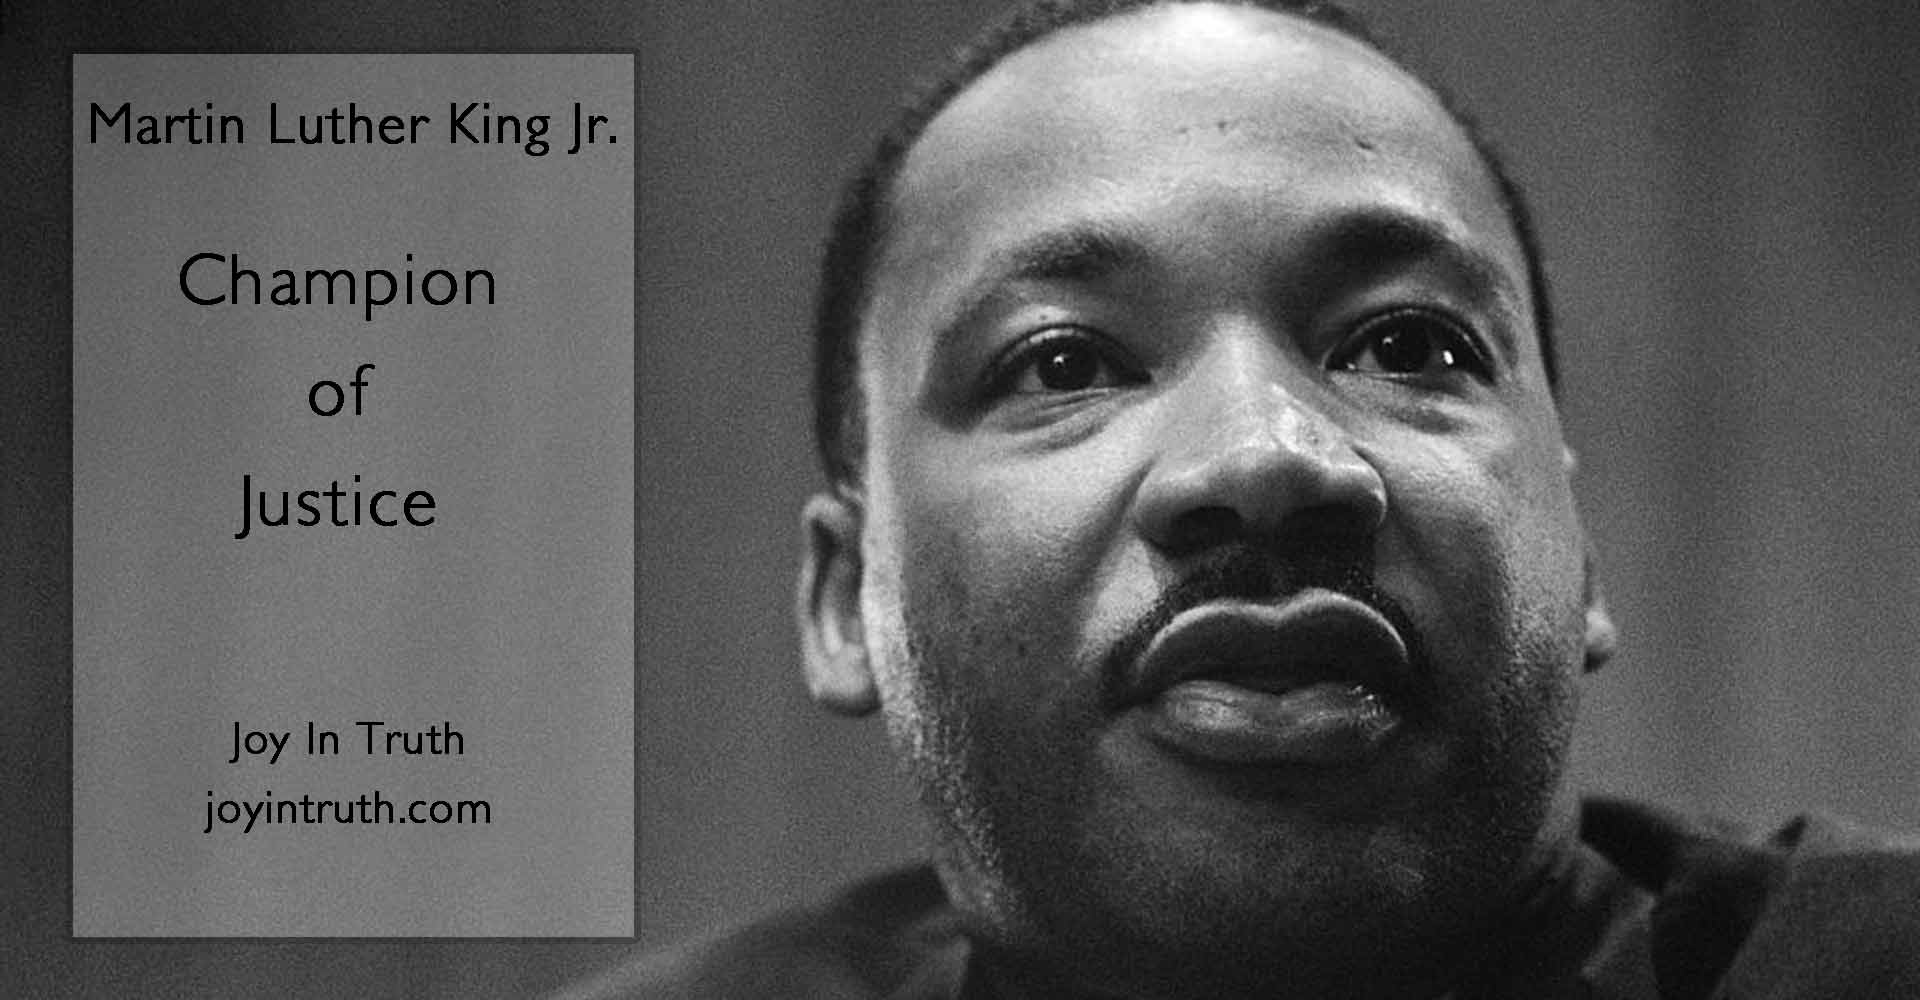 Martin Luther King Jr. Champion of Justice